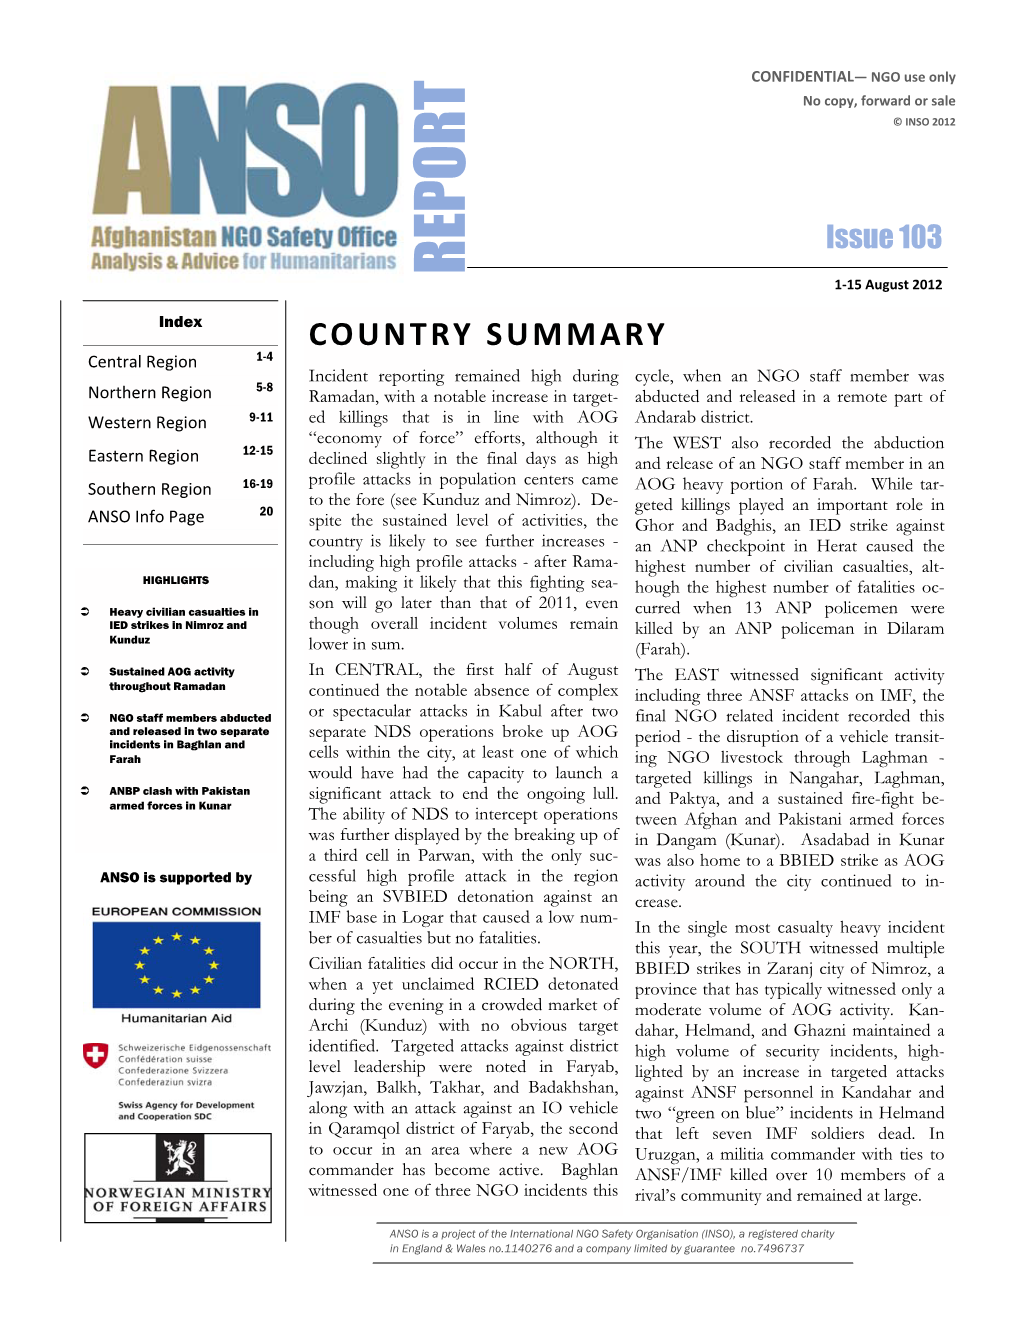 The ANSO Report 1-15 August 2012